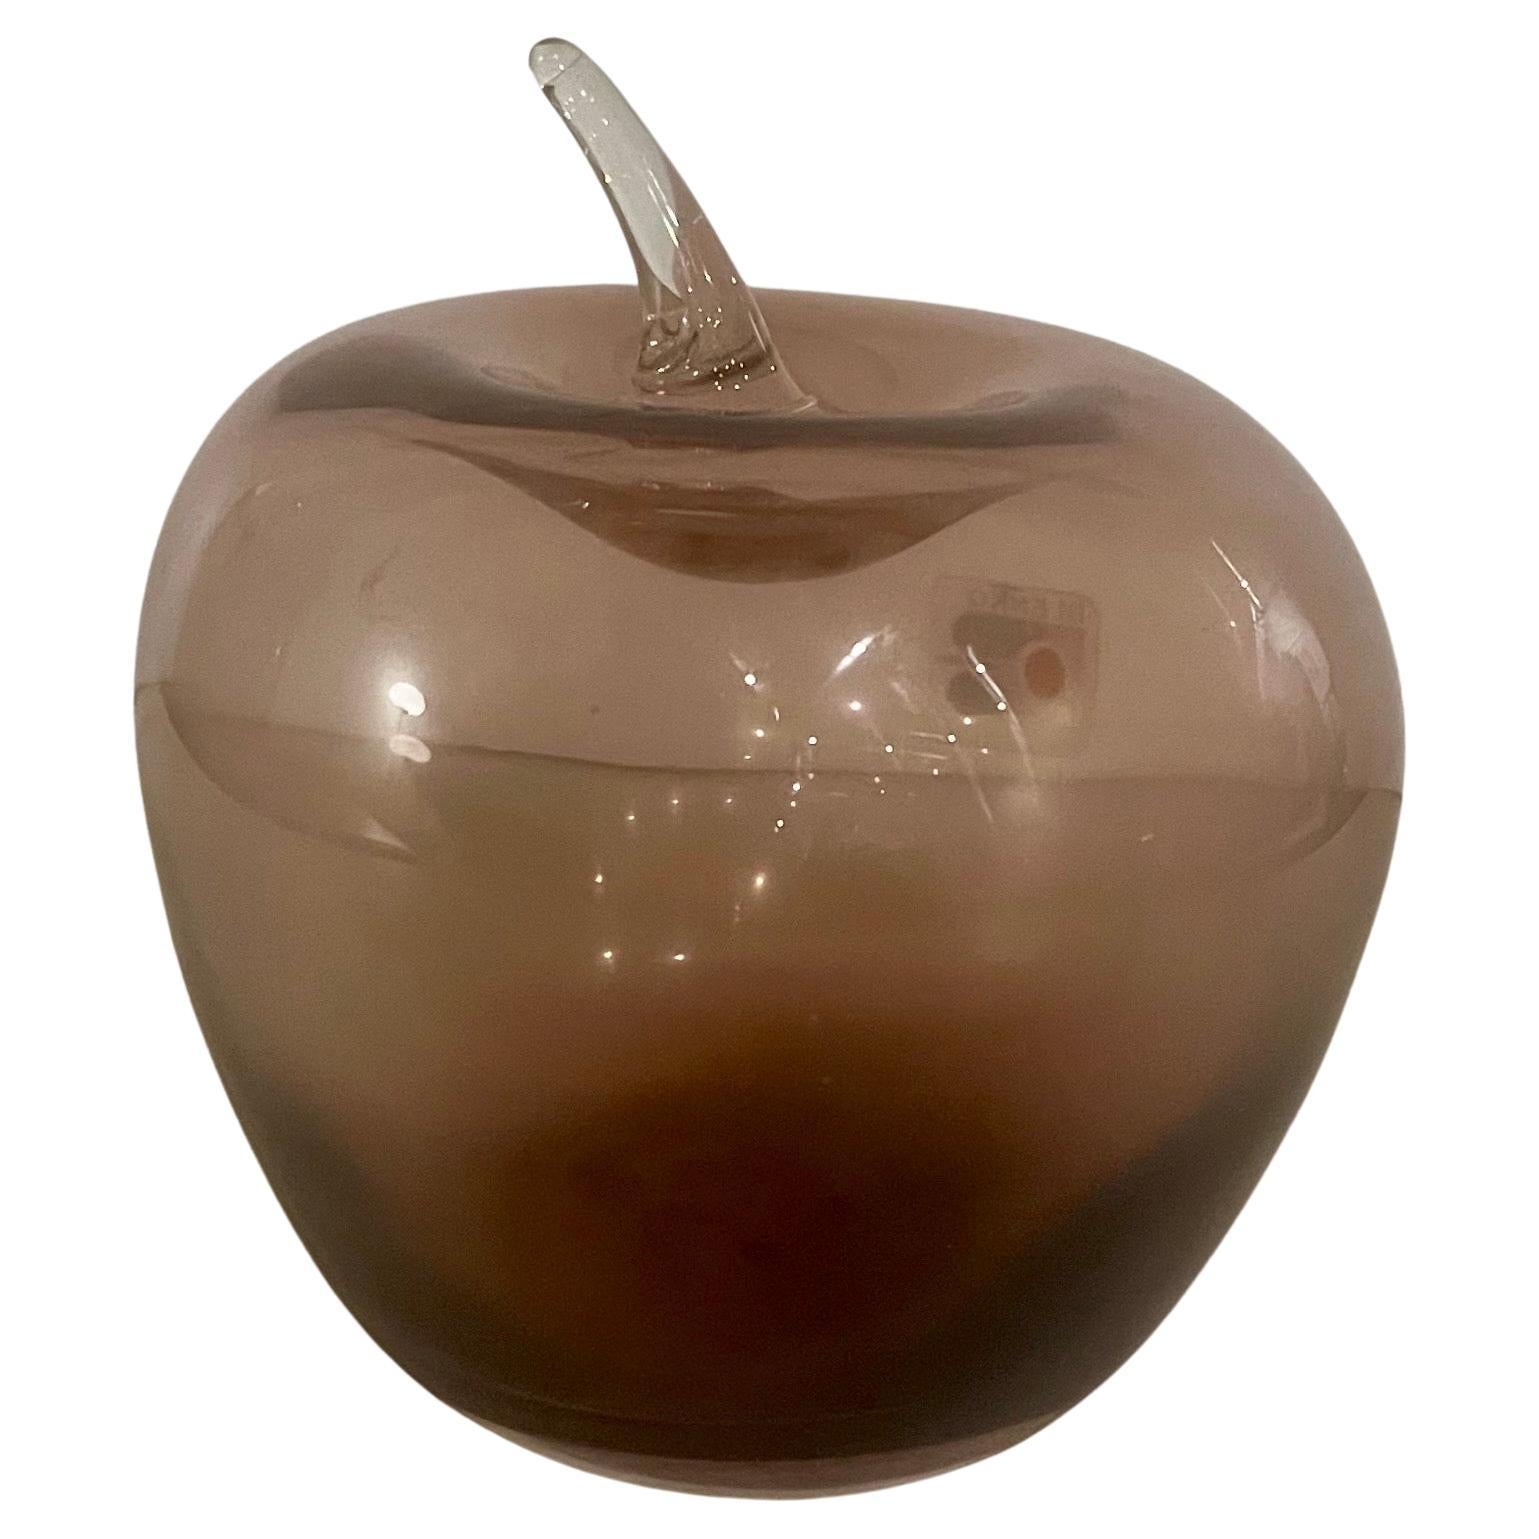 Beautiful purple tainted Blenko glass apple excellent condition no chips or cracks great color and very collectible.